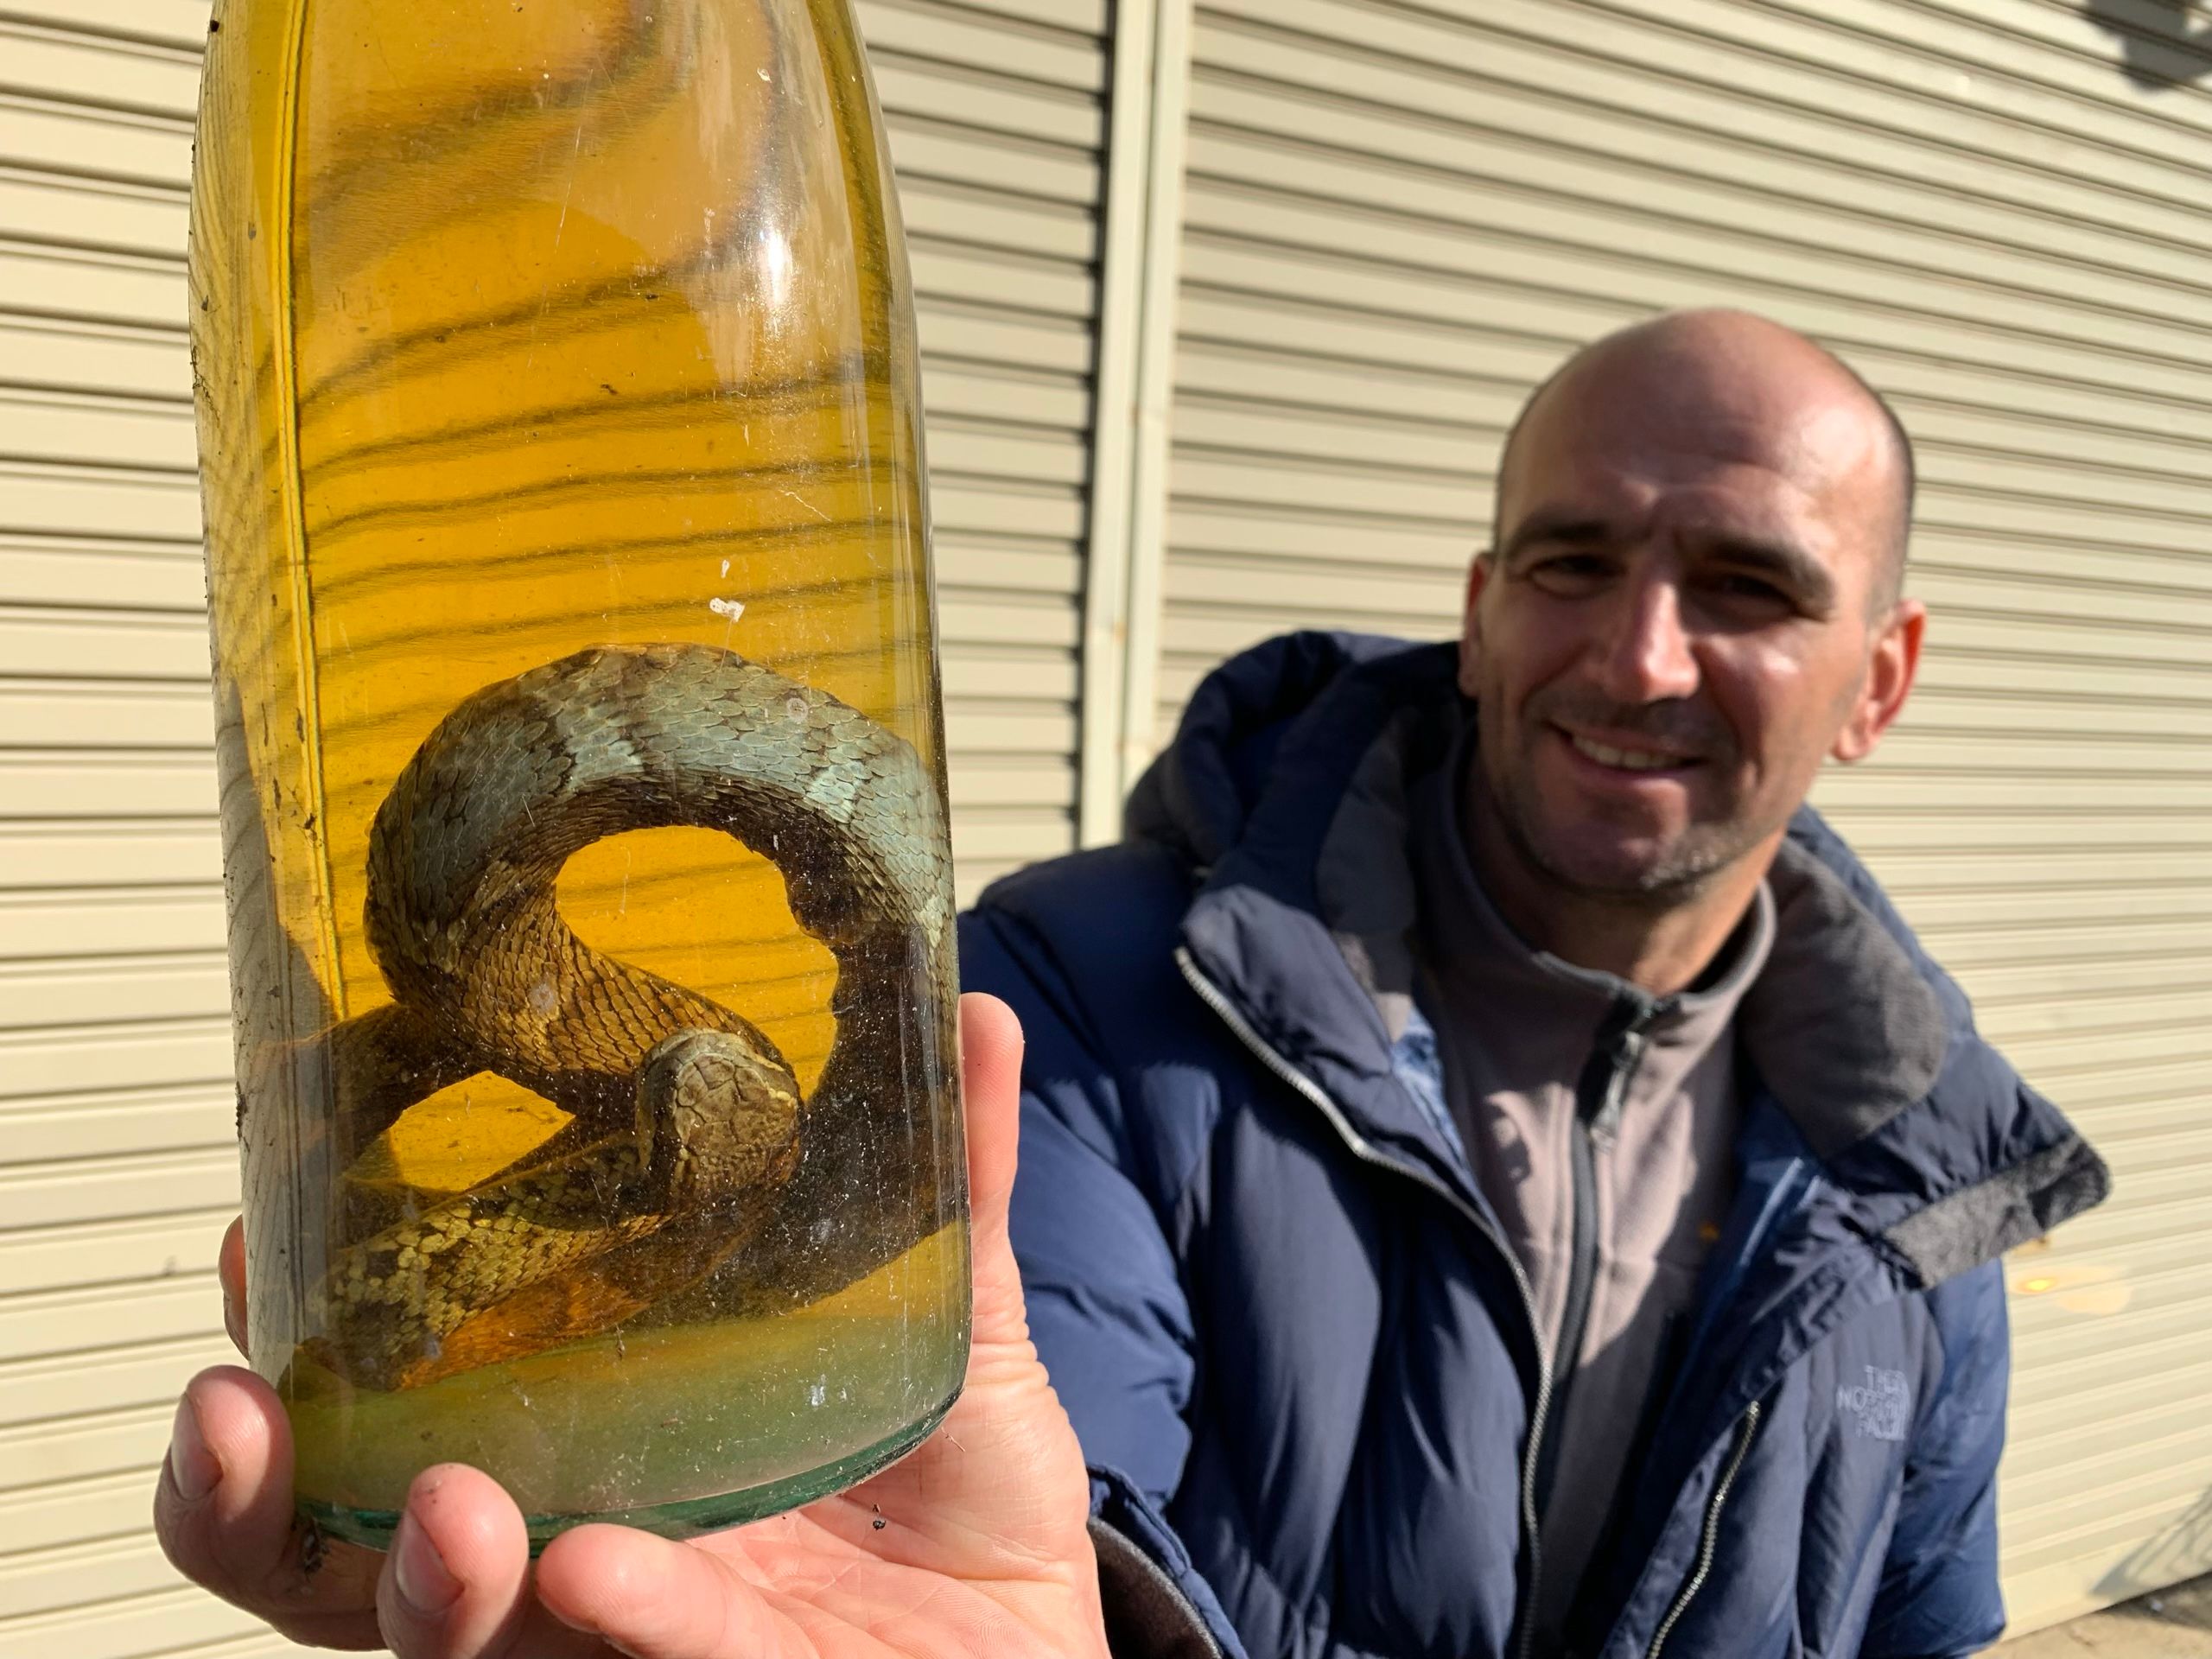 A man in a navy blue parka, Gyökös Lajos, holds up a bottle of yellow liquid with a snake coiled inside.